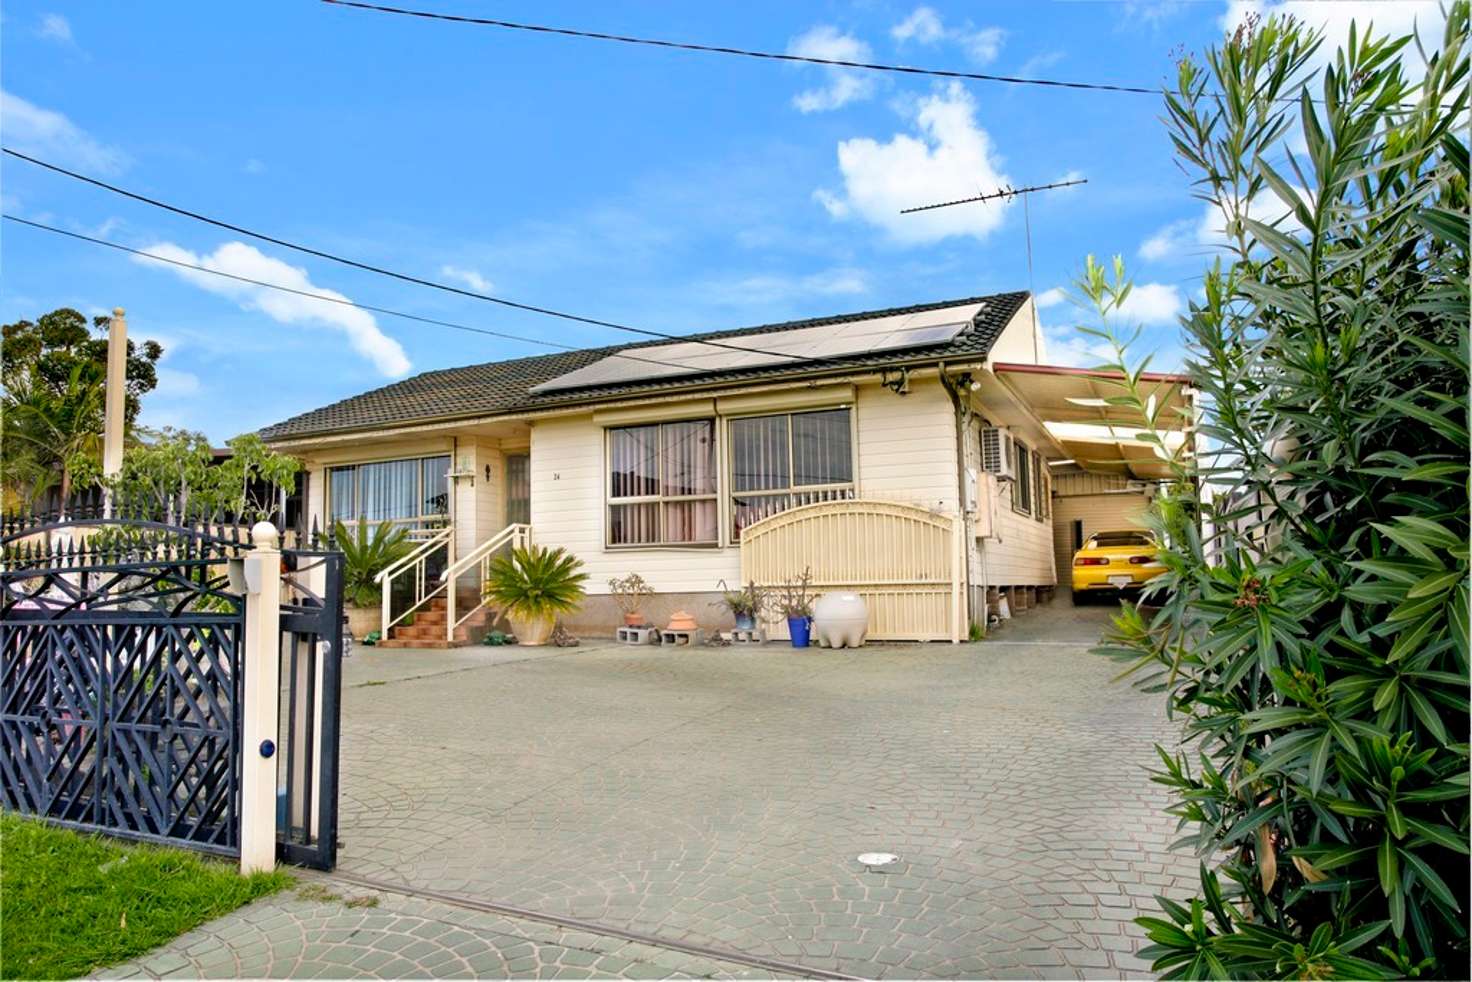 Main view of Homely house listing, 26 MCKIBBIN ST, Canley Heights NSW 2166